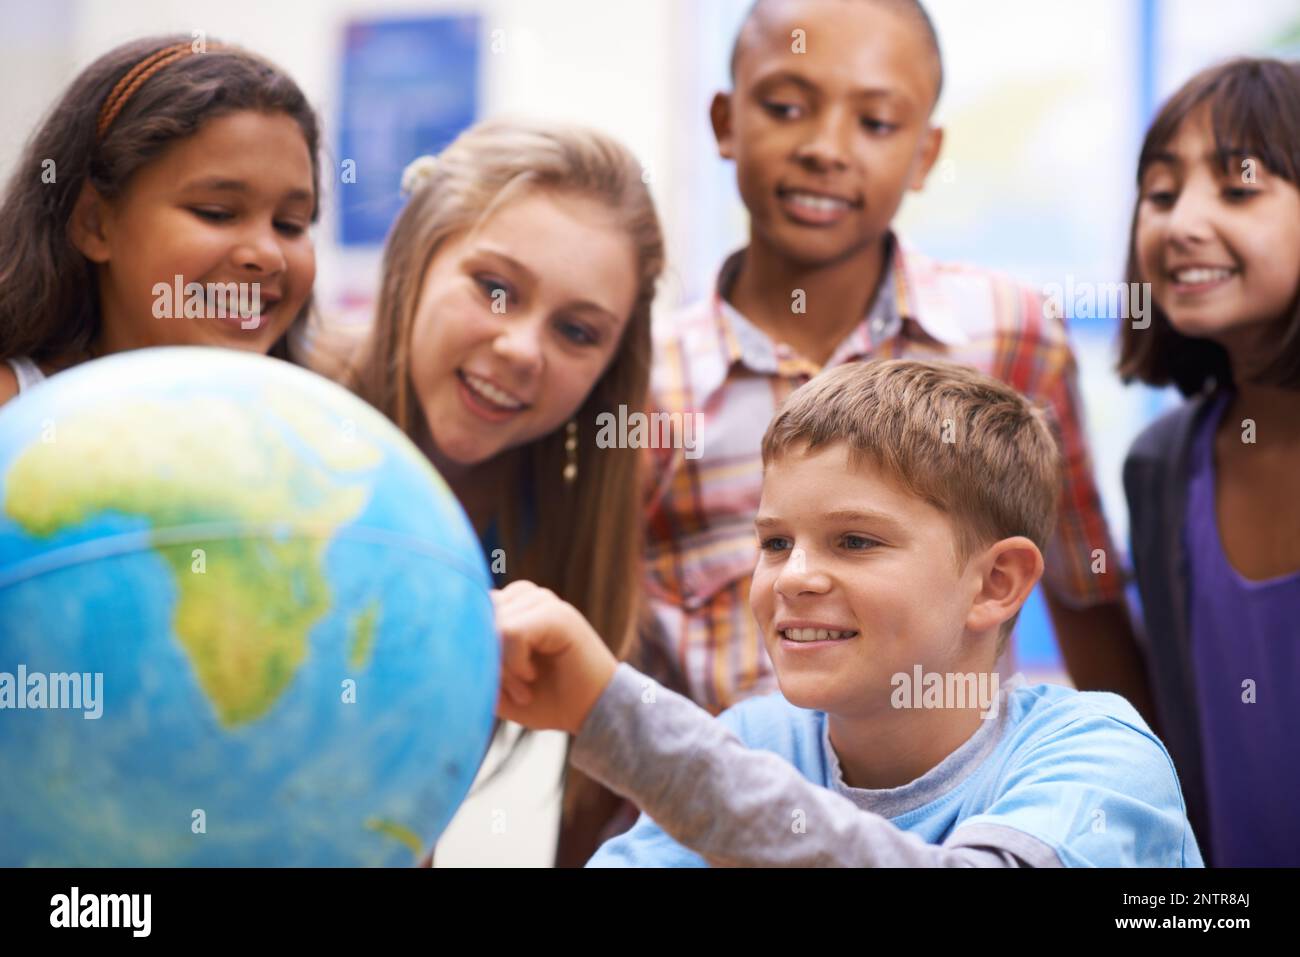 Here it is - Geography class. A group of pupils looking at a globe during geography class. Stock Photo